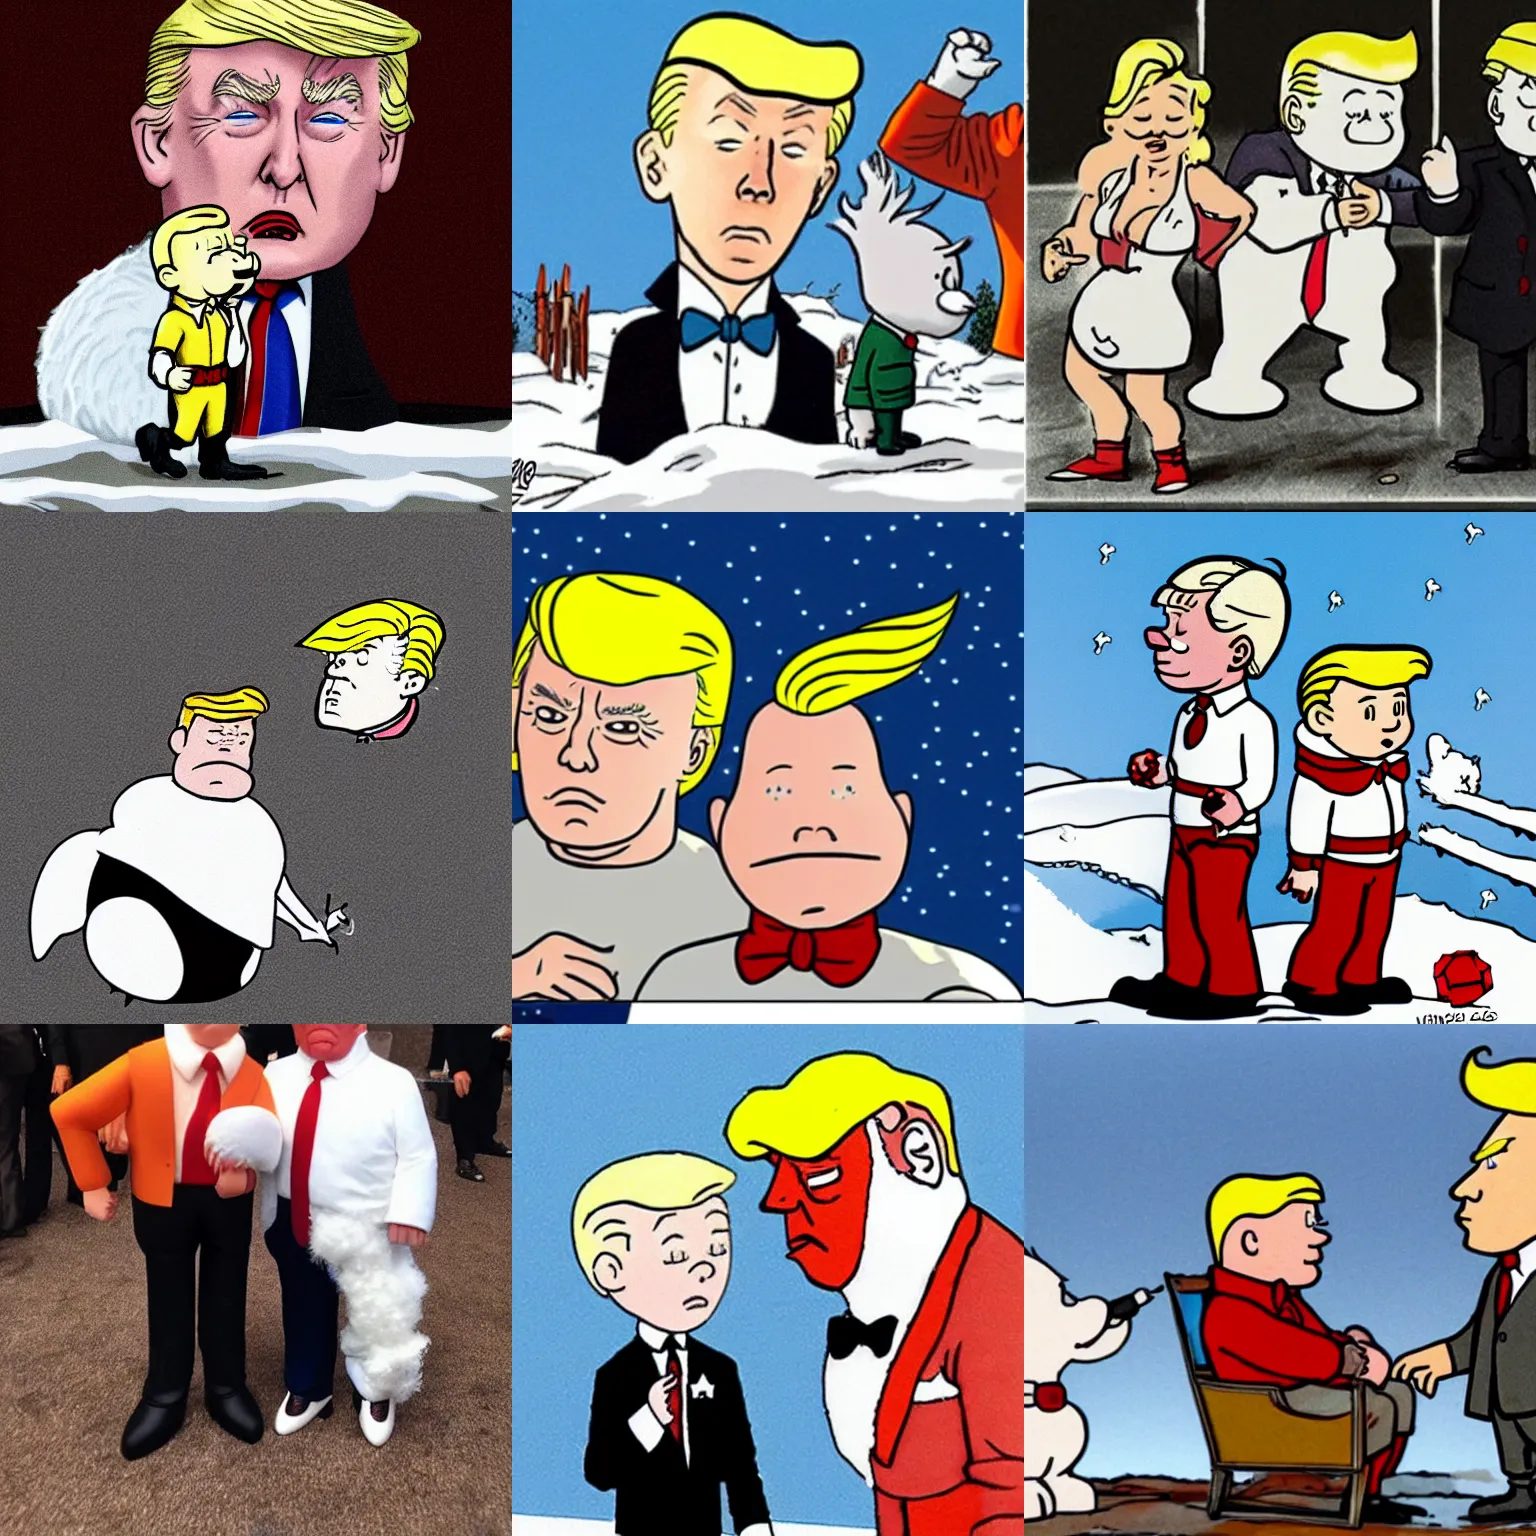 Prompt: Snowy and Tintin as Donald Trump